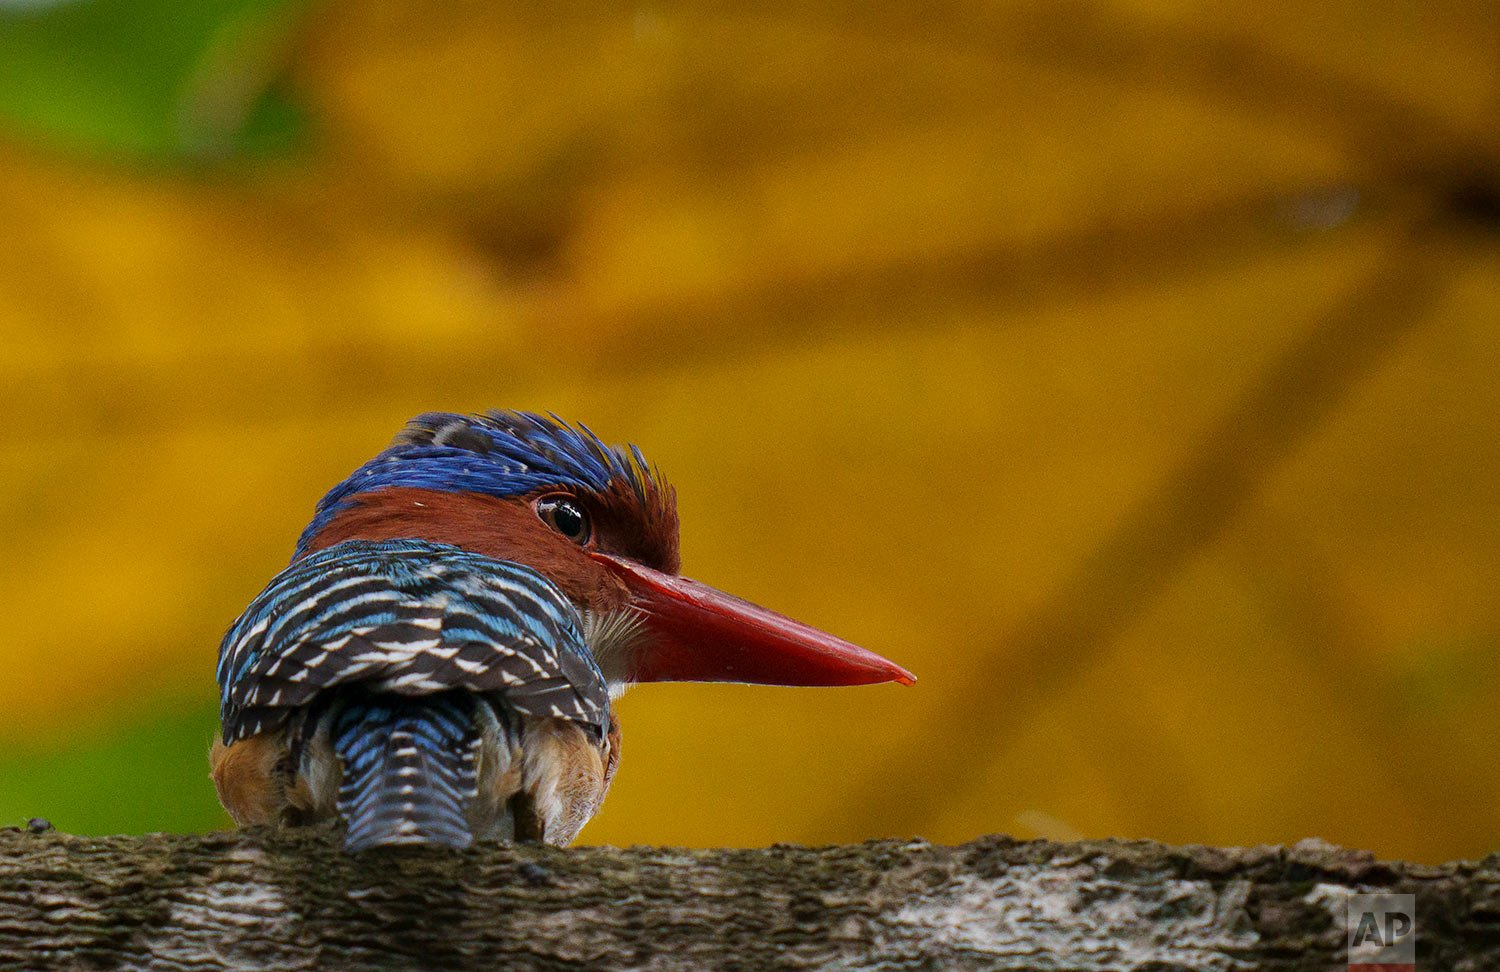  A male Banded Kingfisher rests on a tree branch in outside Kuala Lumpur, Malaysia, Friday, Oct. 8, 2021. (AP Photo/Vincent Thian) 